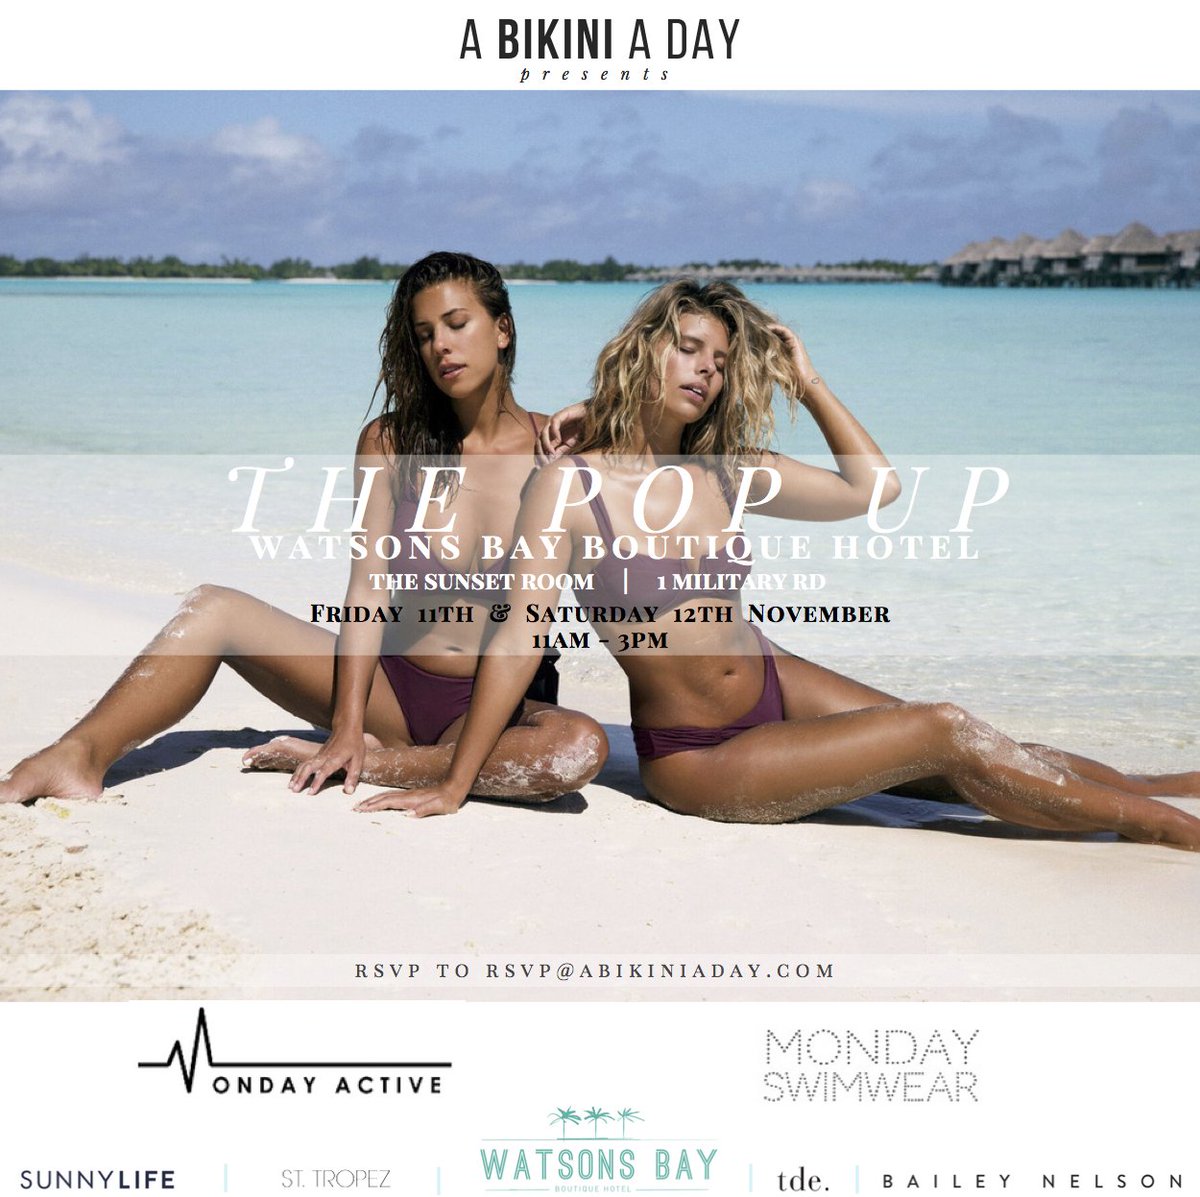 RT @StTropezTan: Only a few days left before we join @ABikiniADay at the pop up! RT if you are going to be there! https://t.co/iYkMZVw8R3